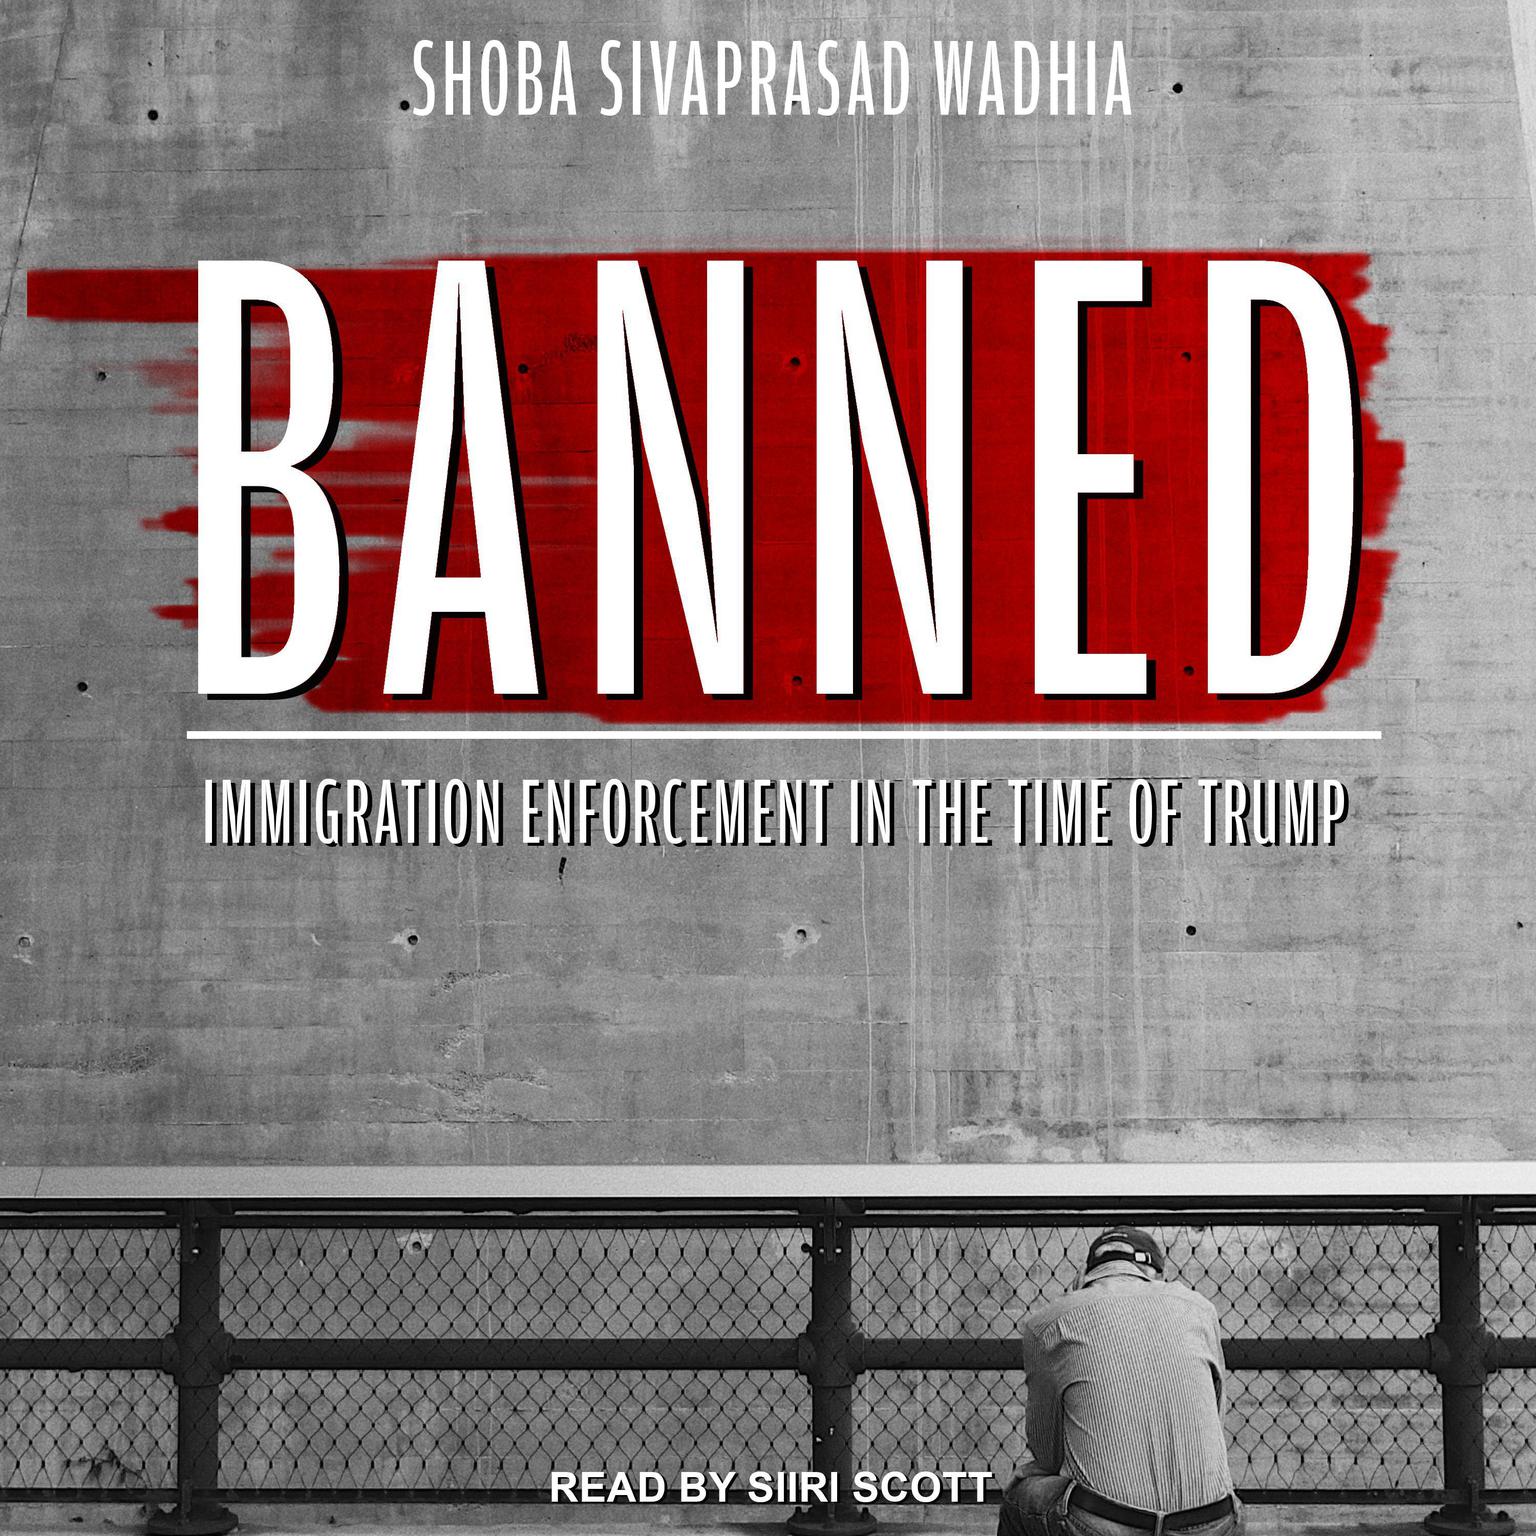 Banned: Immigration Enforcement in the Time of Trump Audiobook, by Shoba Sivaprasad Wadhia